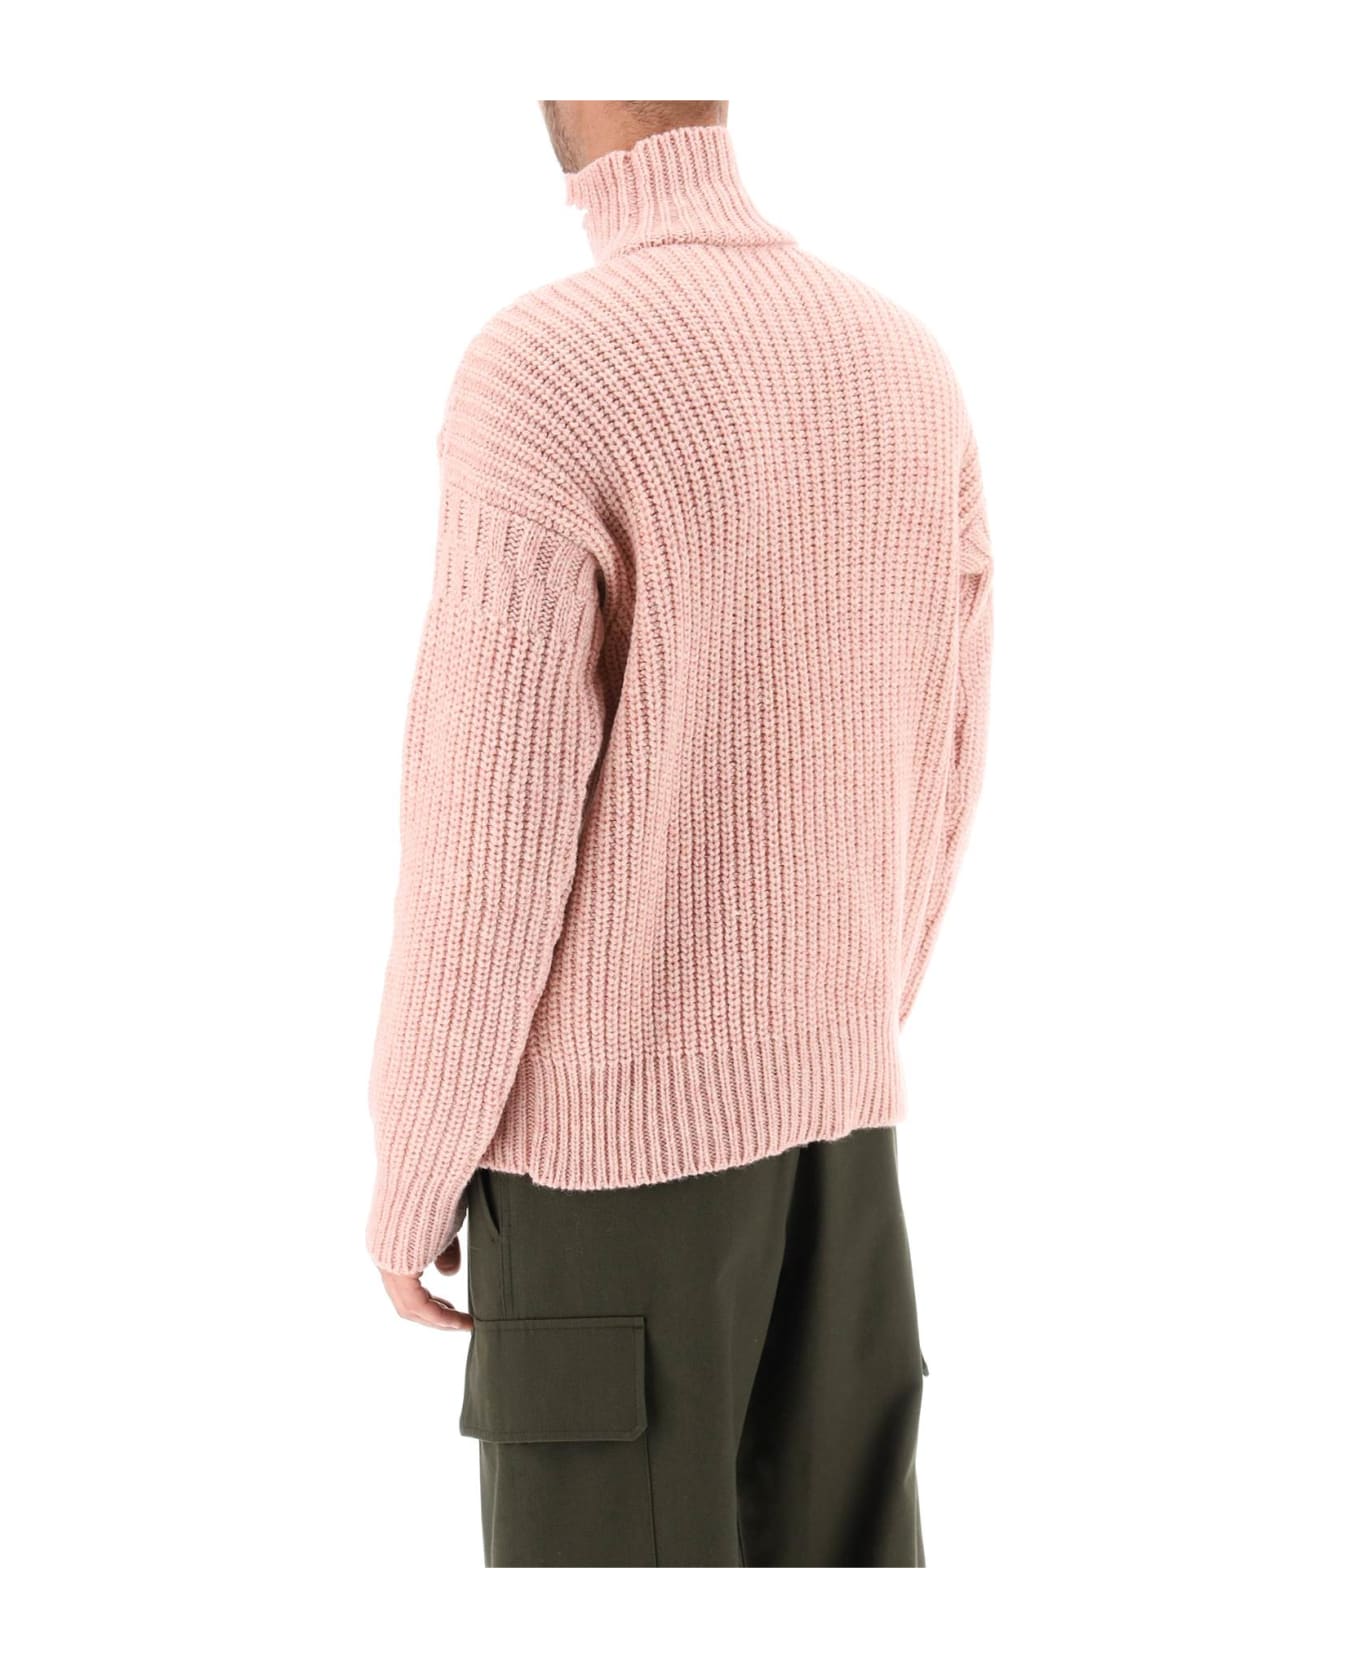 Marni Funnel-neck Sweater In Destroyed-effect Wool - QUARTZ (Pink)